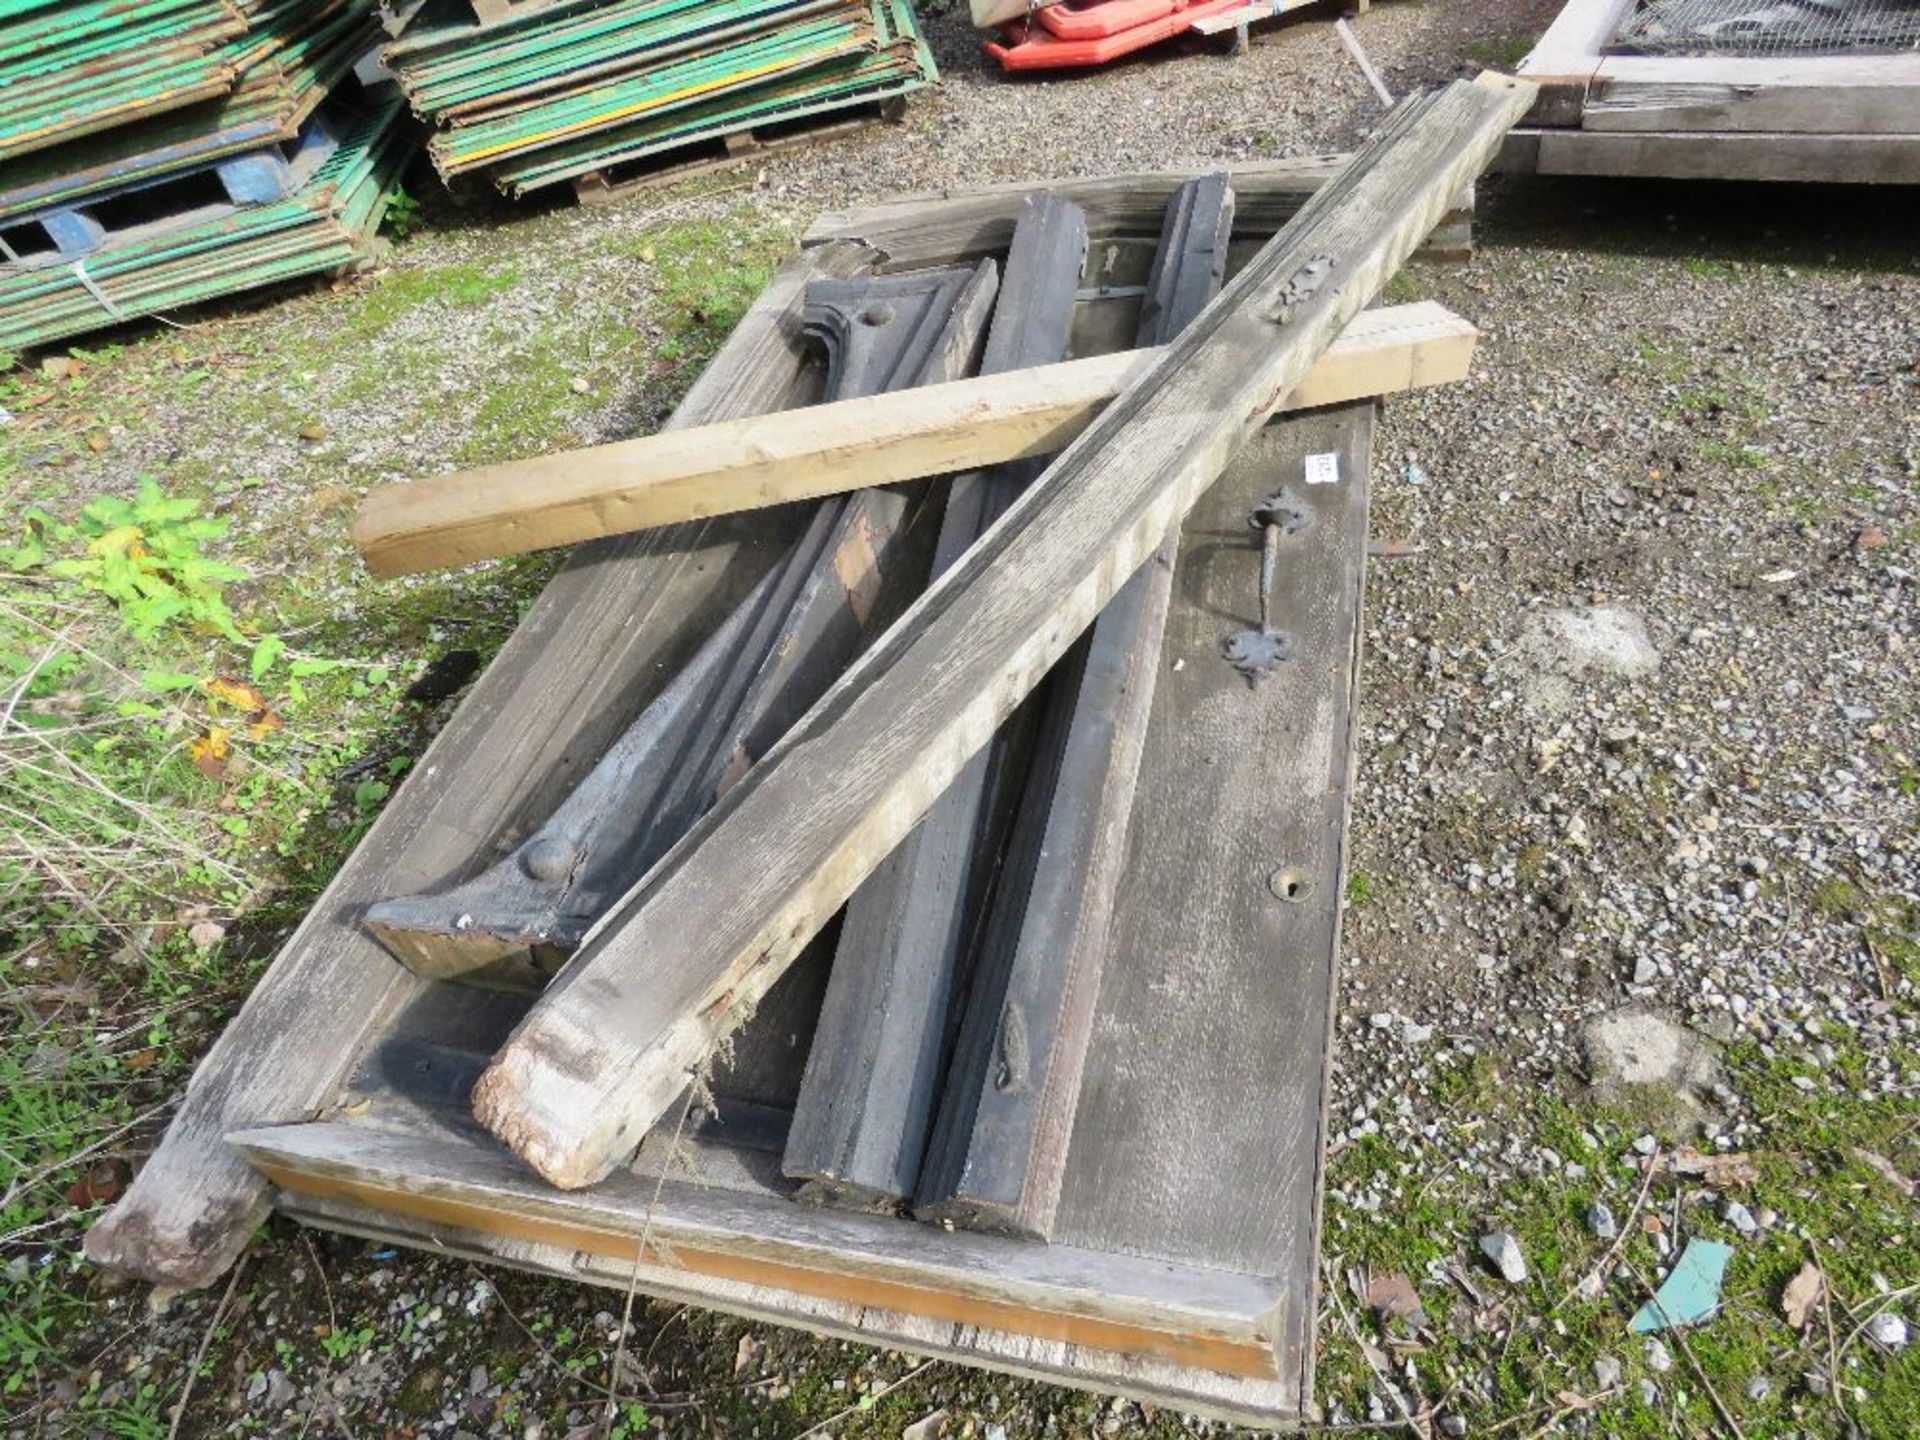 HARDWOOD VINTAGE WOODEN FRAME WITH DOOR, 1.2M WIDE X 2M HEIGHT EXTERNAL FRAME APPROX. THIS LOT IS - Image 2 of 5